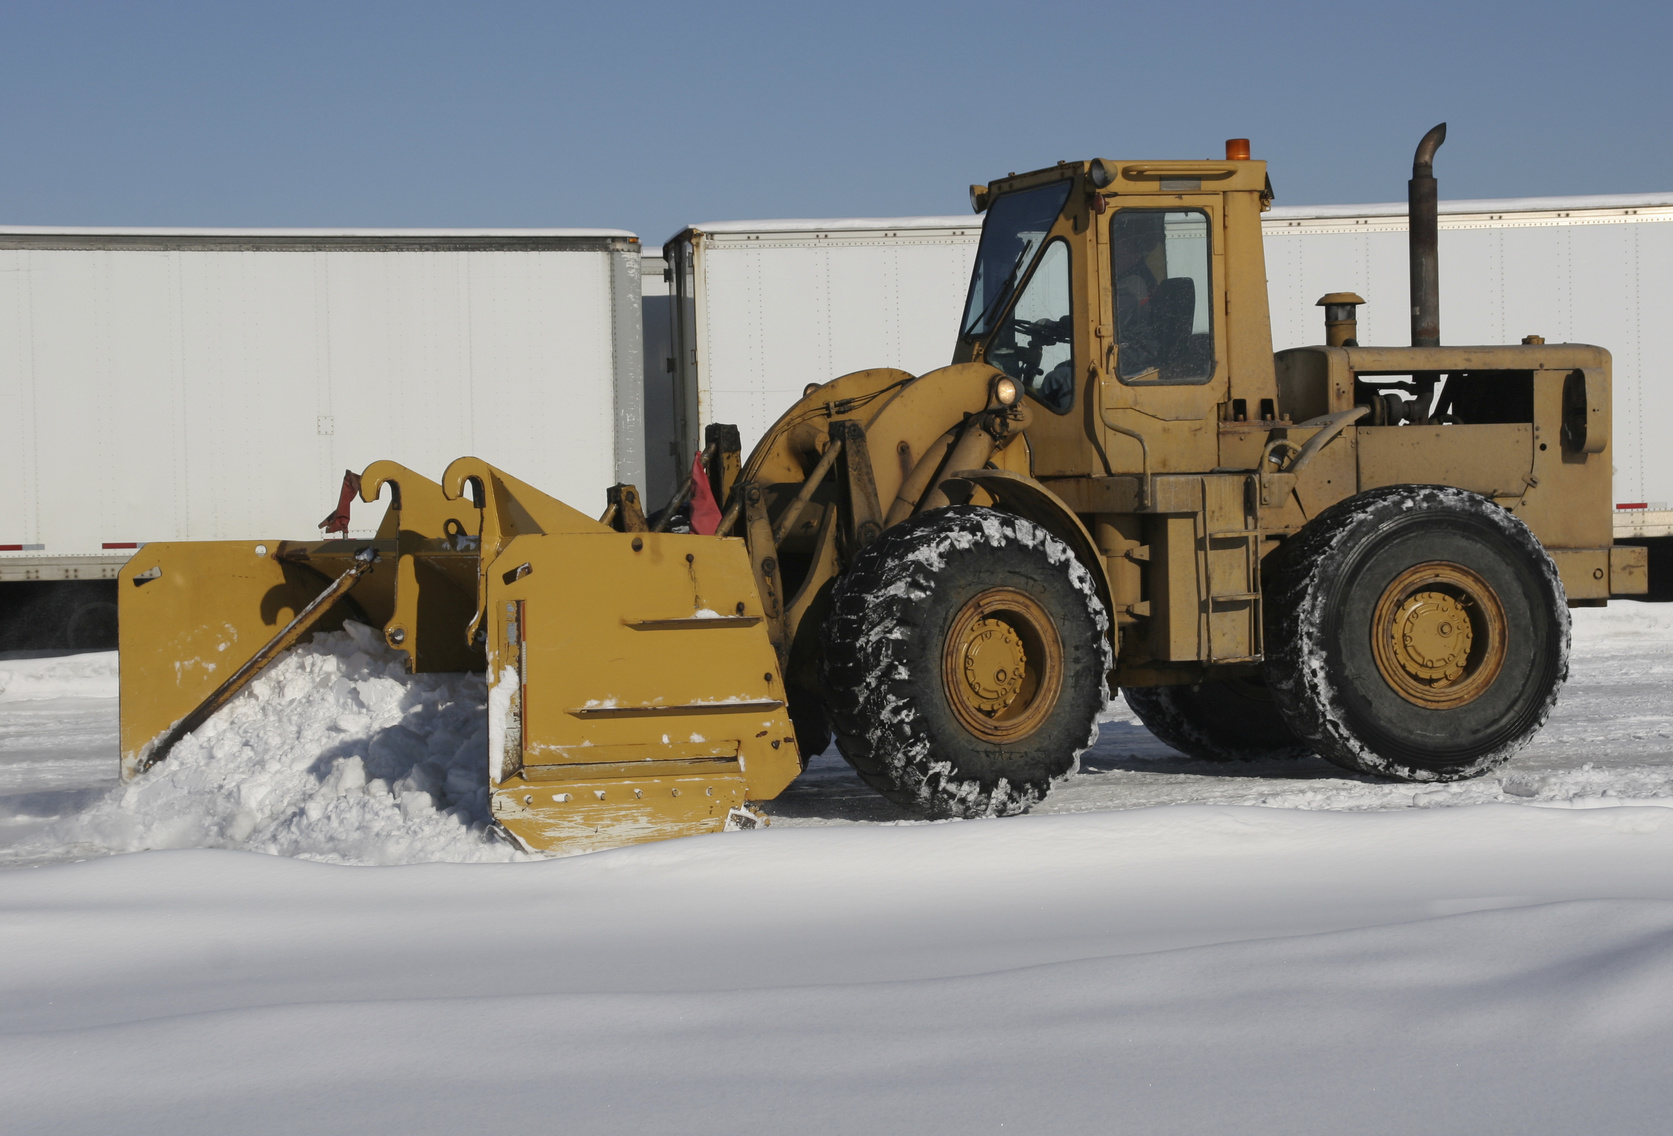 Large front end loader clearing snow after a storm